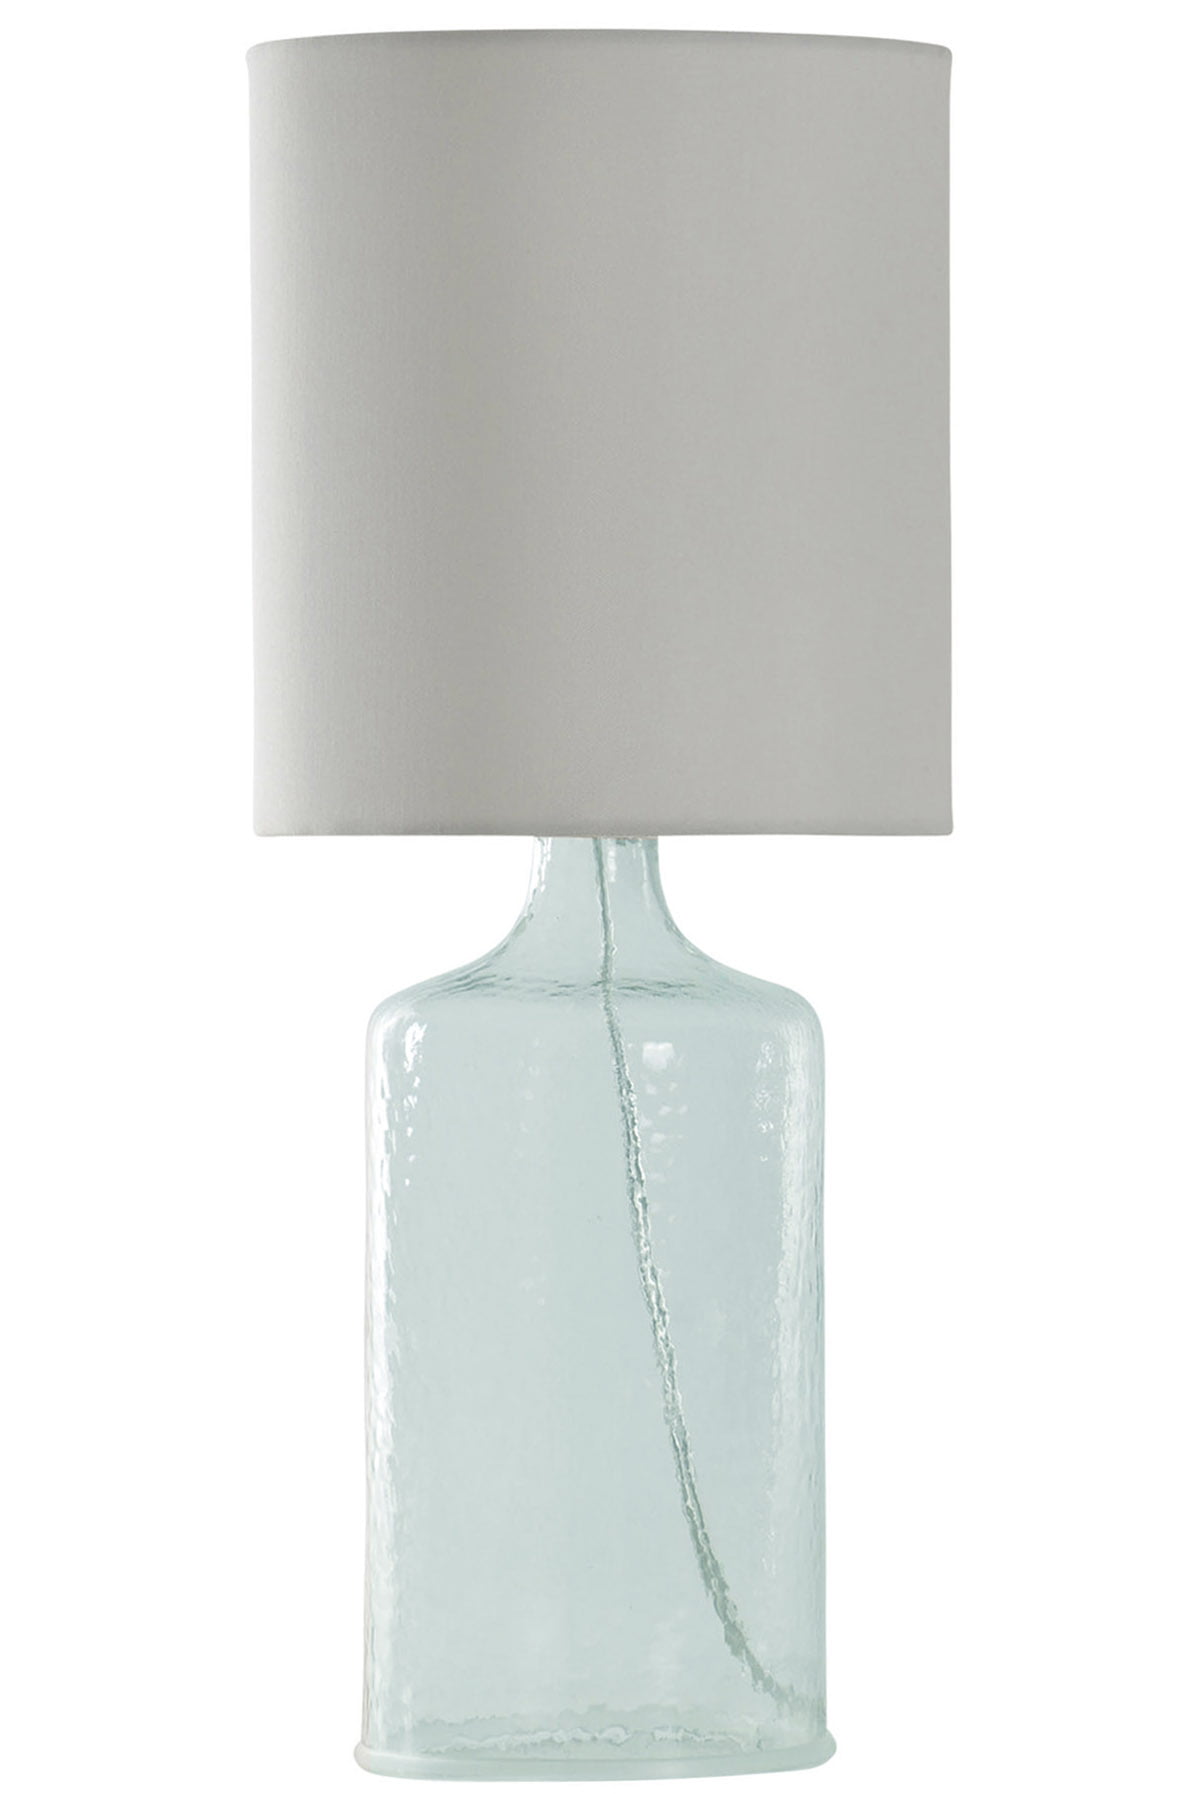 Gwg Seeded Glass Table Lamp In, Clear Seeded Glass Table Lamp